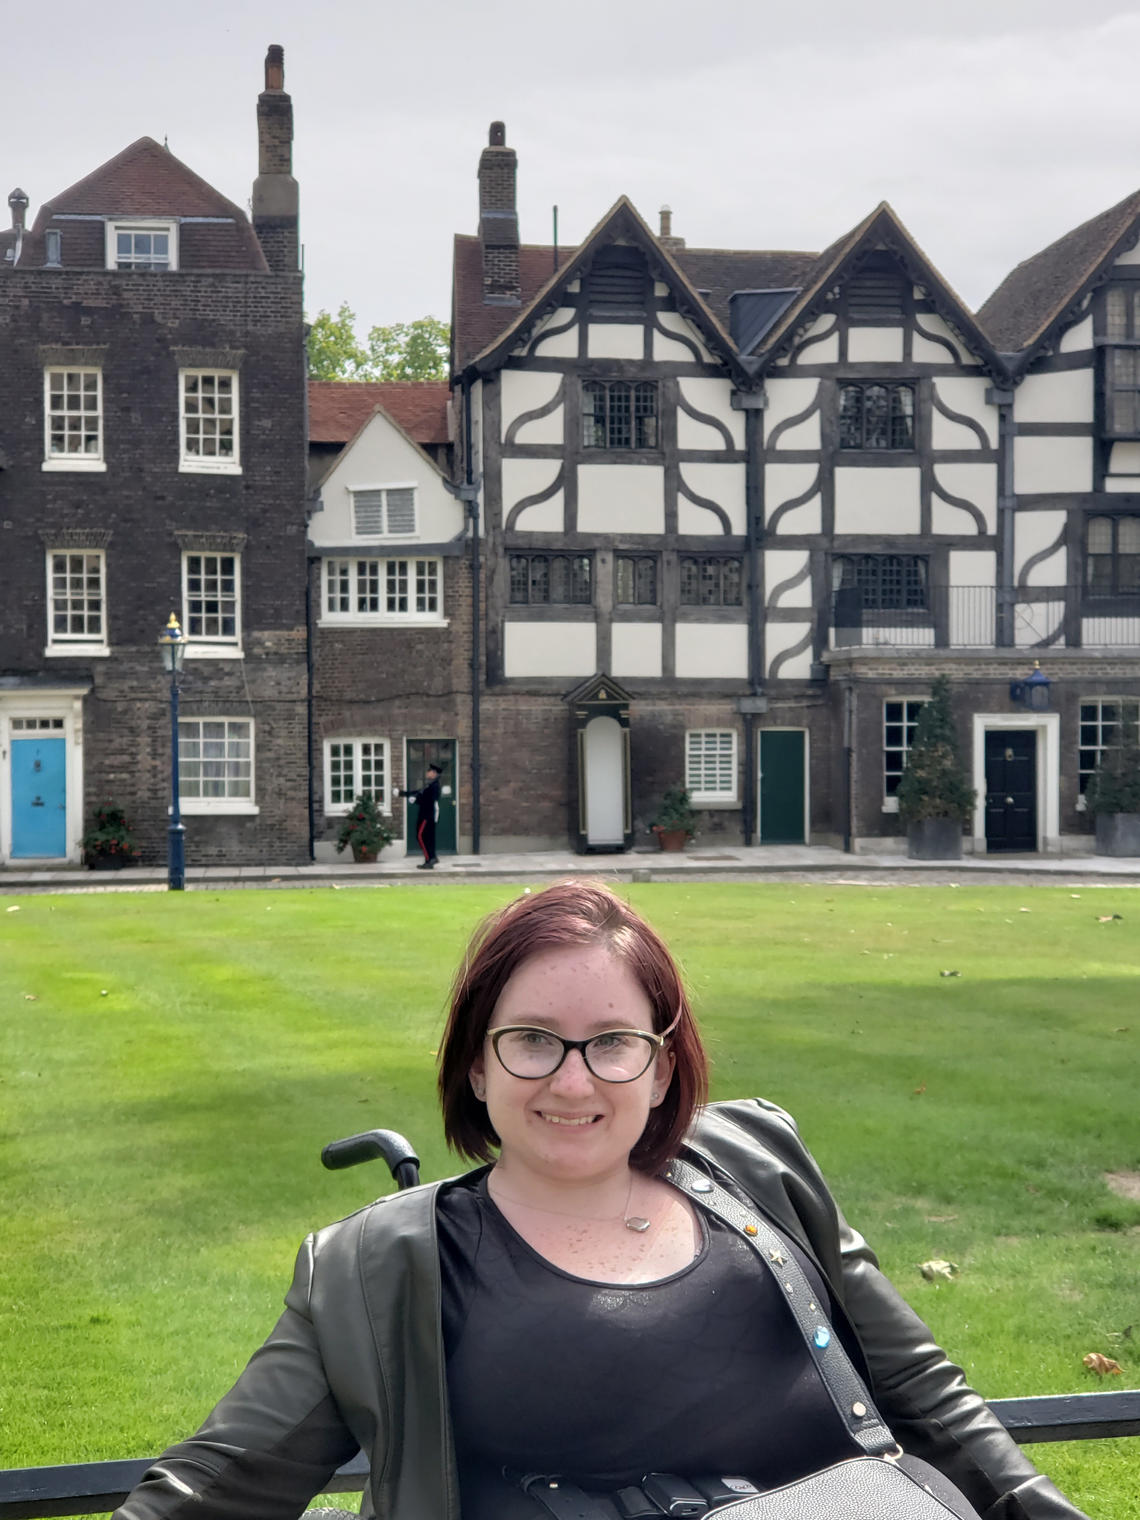 Keighley Schofield helped develop the Transition Navigator Trial project. The third-year psychology student at St. Mary’s University College in Calgary is pictured here on her summer vacation visiting London, England.